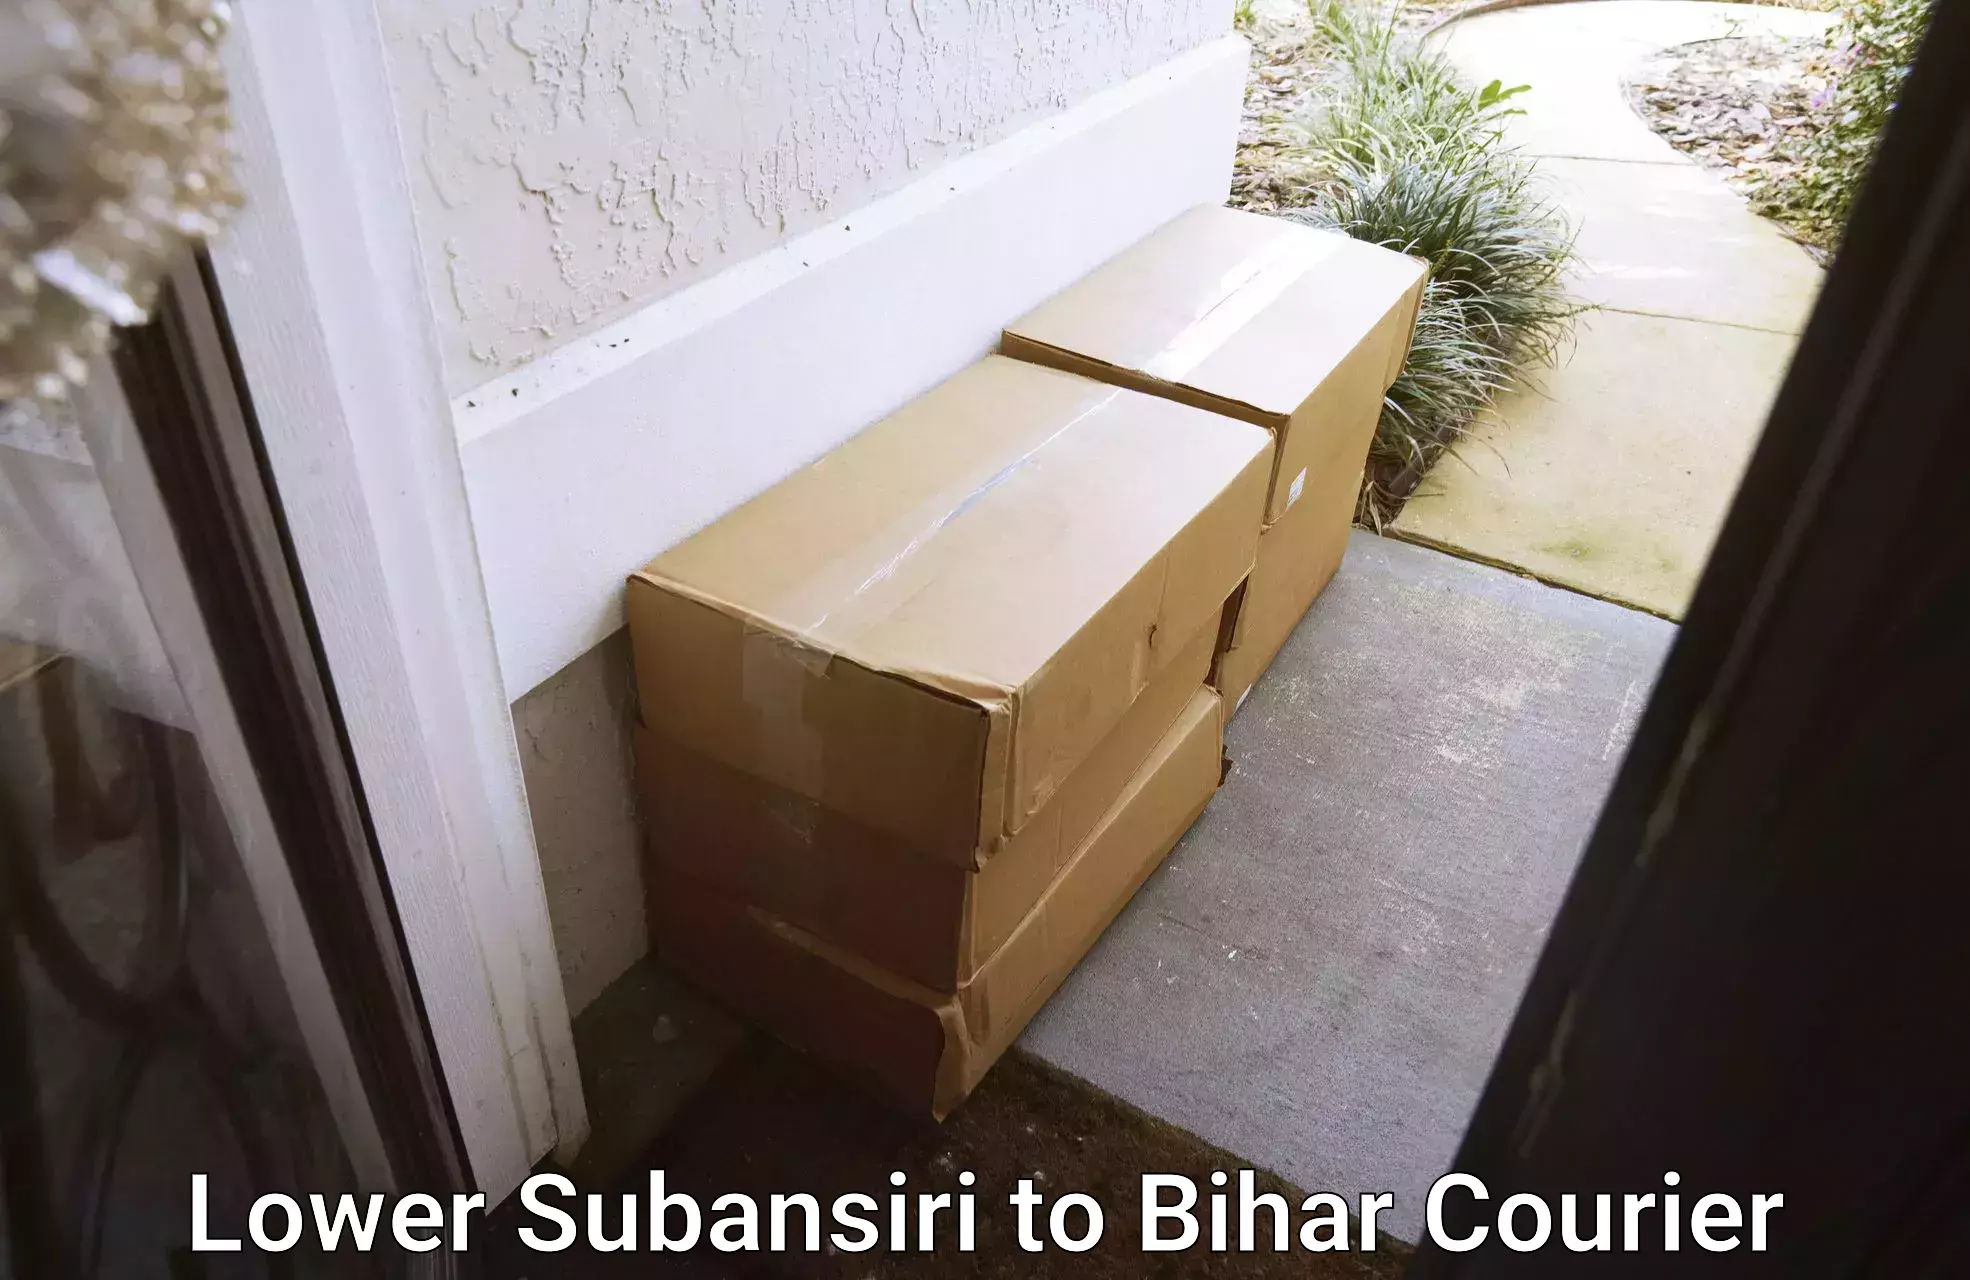 Residential courier service Lower Subansiri to Gauripur